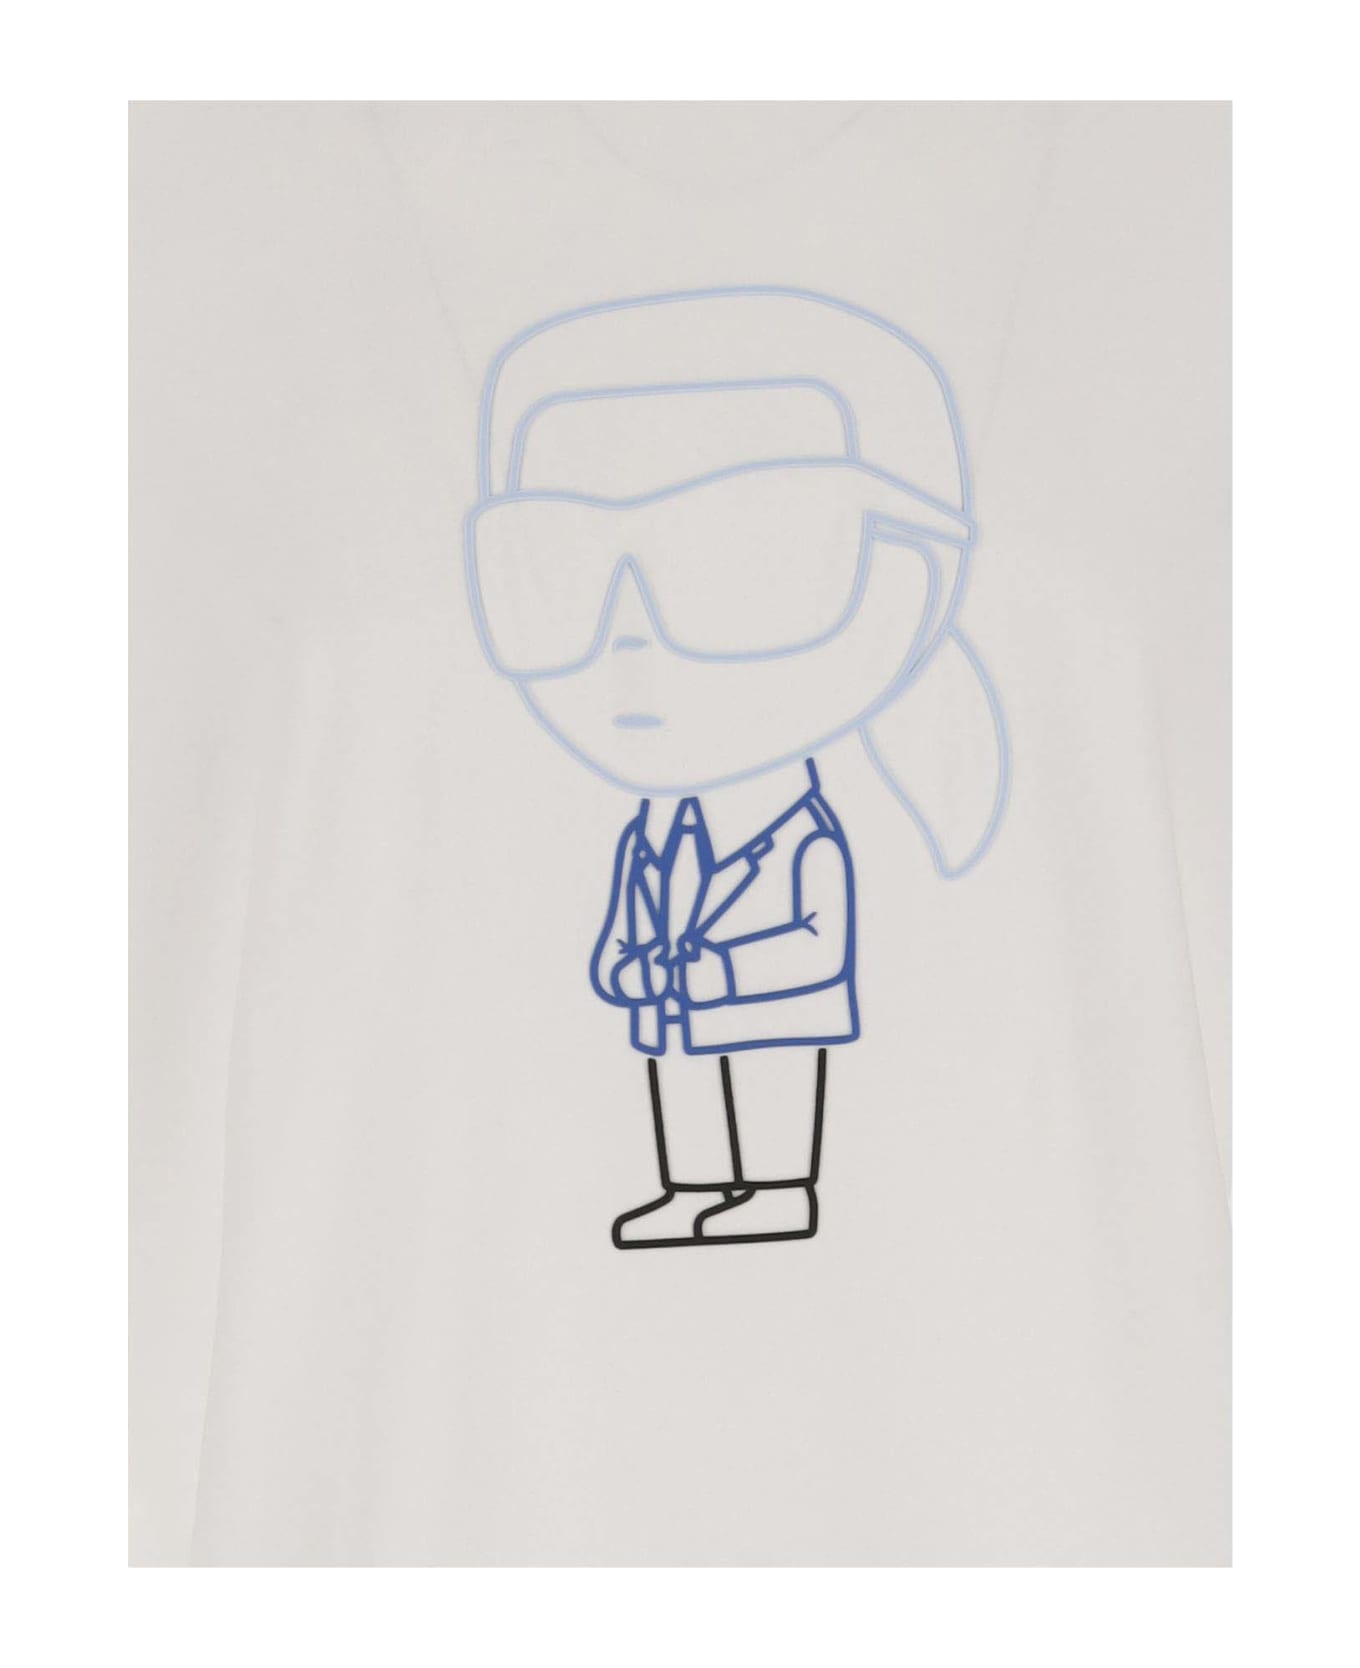 Karl Lagerfeld Stretch Cotton T-shirt With Logo - White シャツ